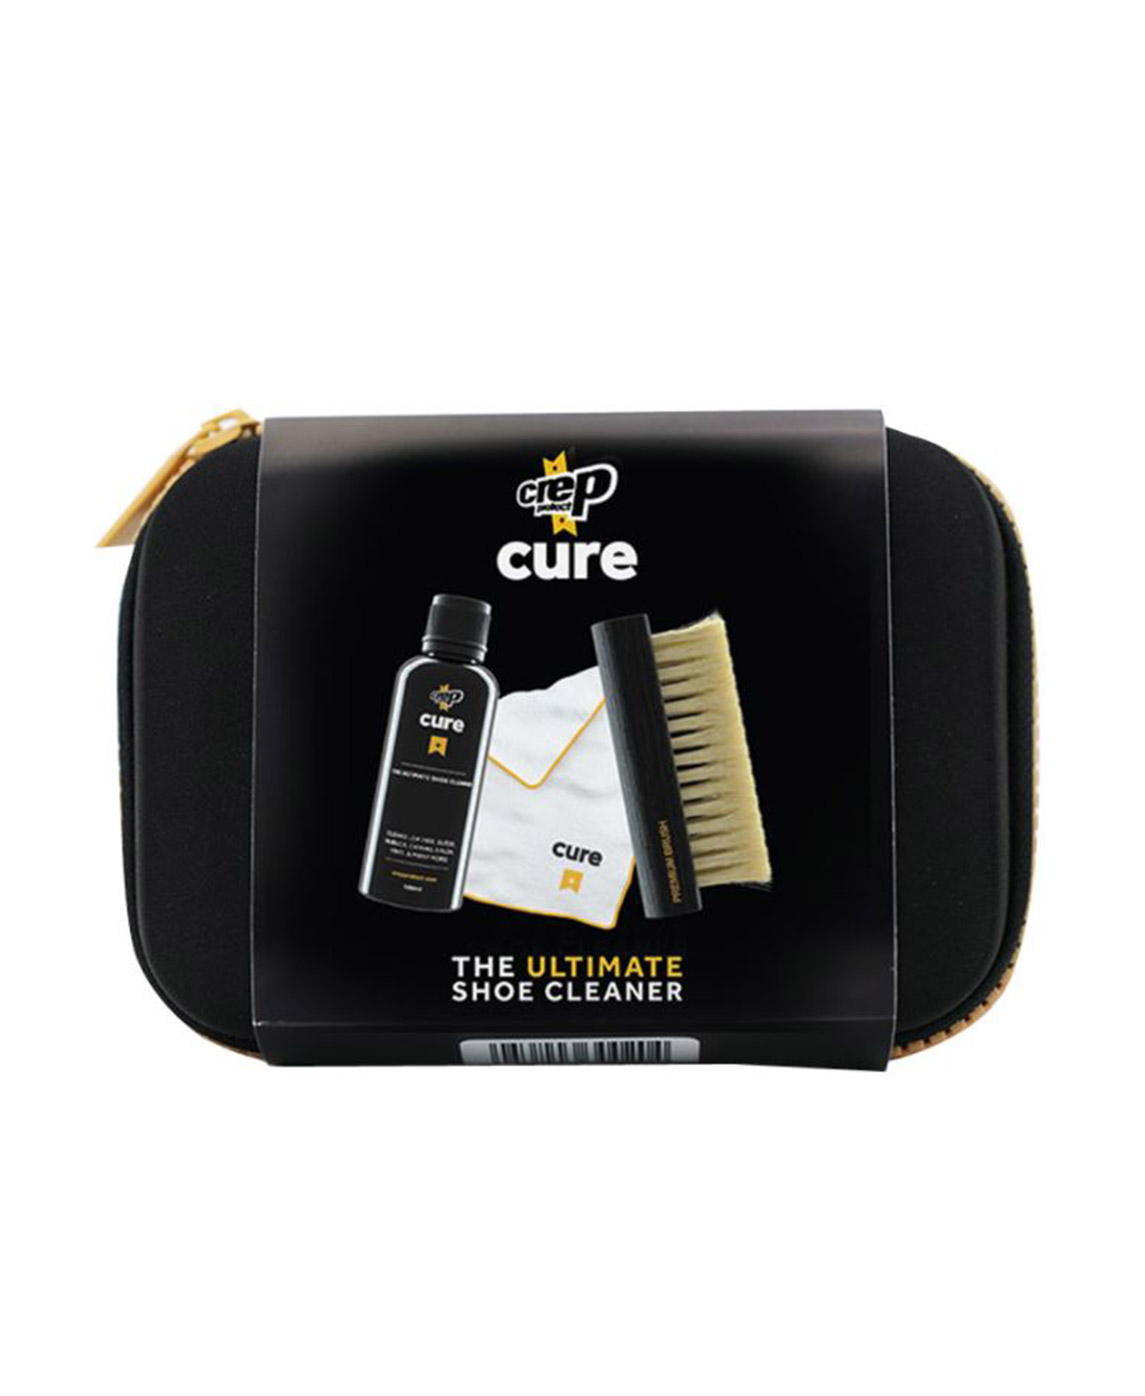 CREP CURE CLEANING KIT 1044158.0 Ο-C 119731